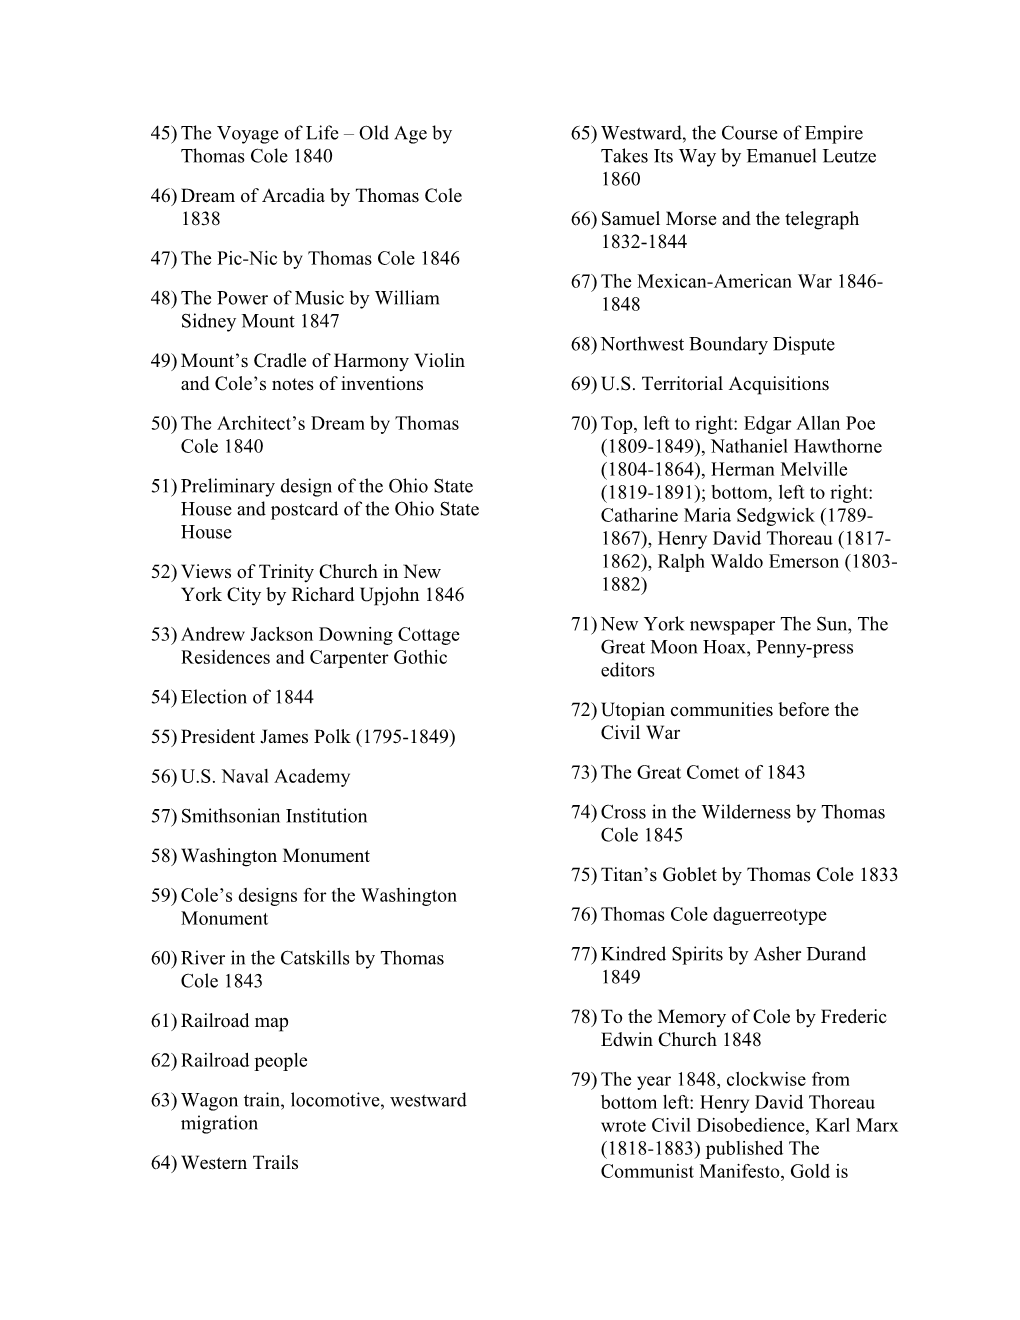 Slide List for American Political and Social History I Jackson to the Civil War